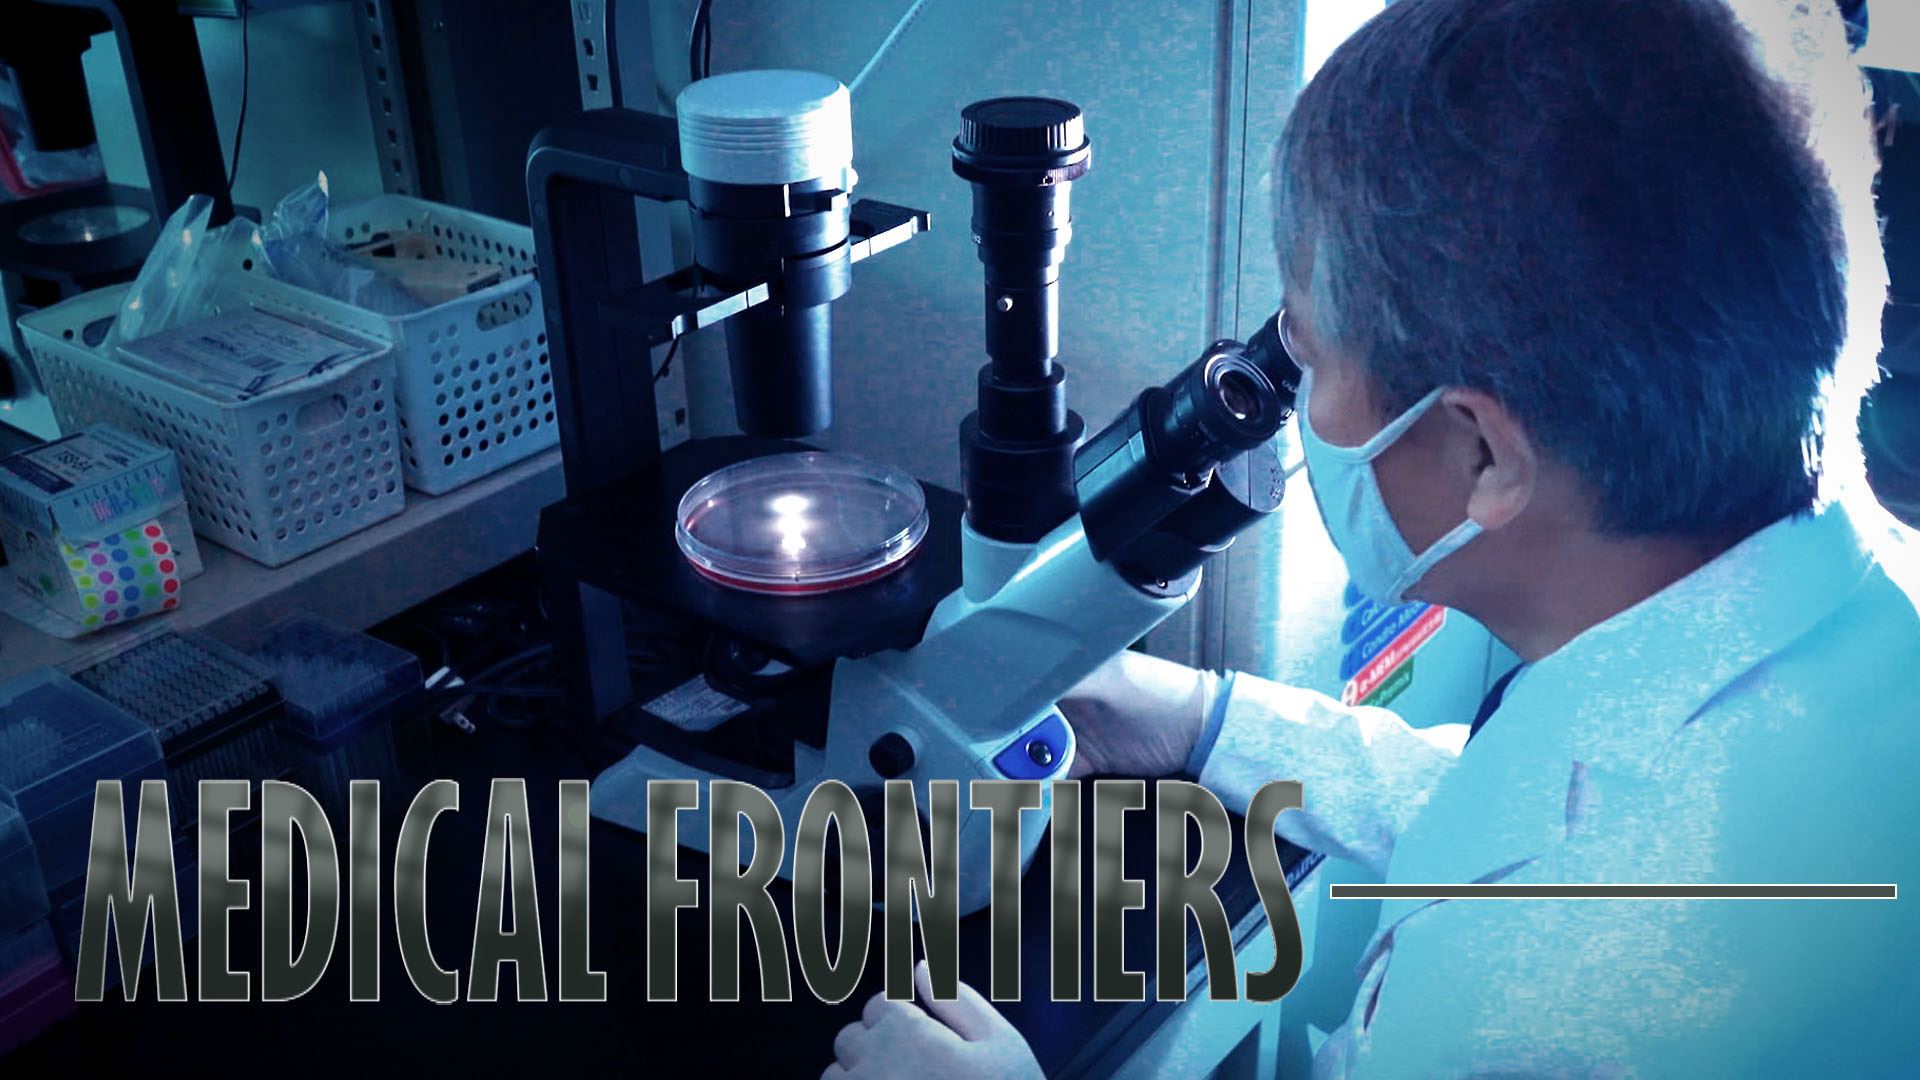 Check out Medical Frontiers Season 2 on your local station!